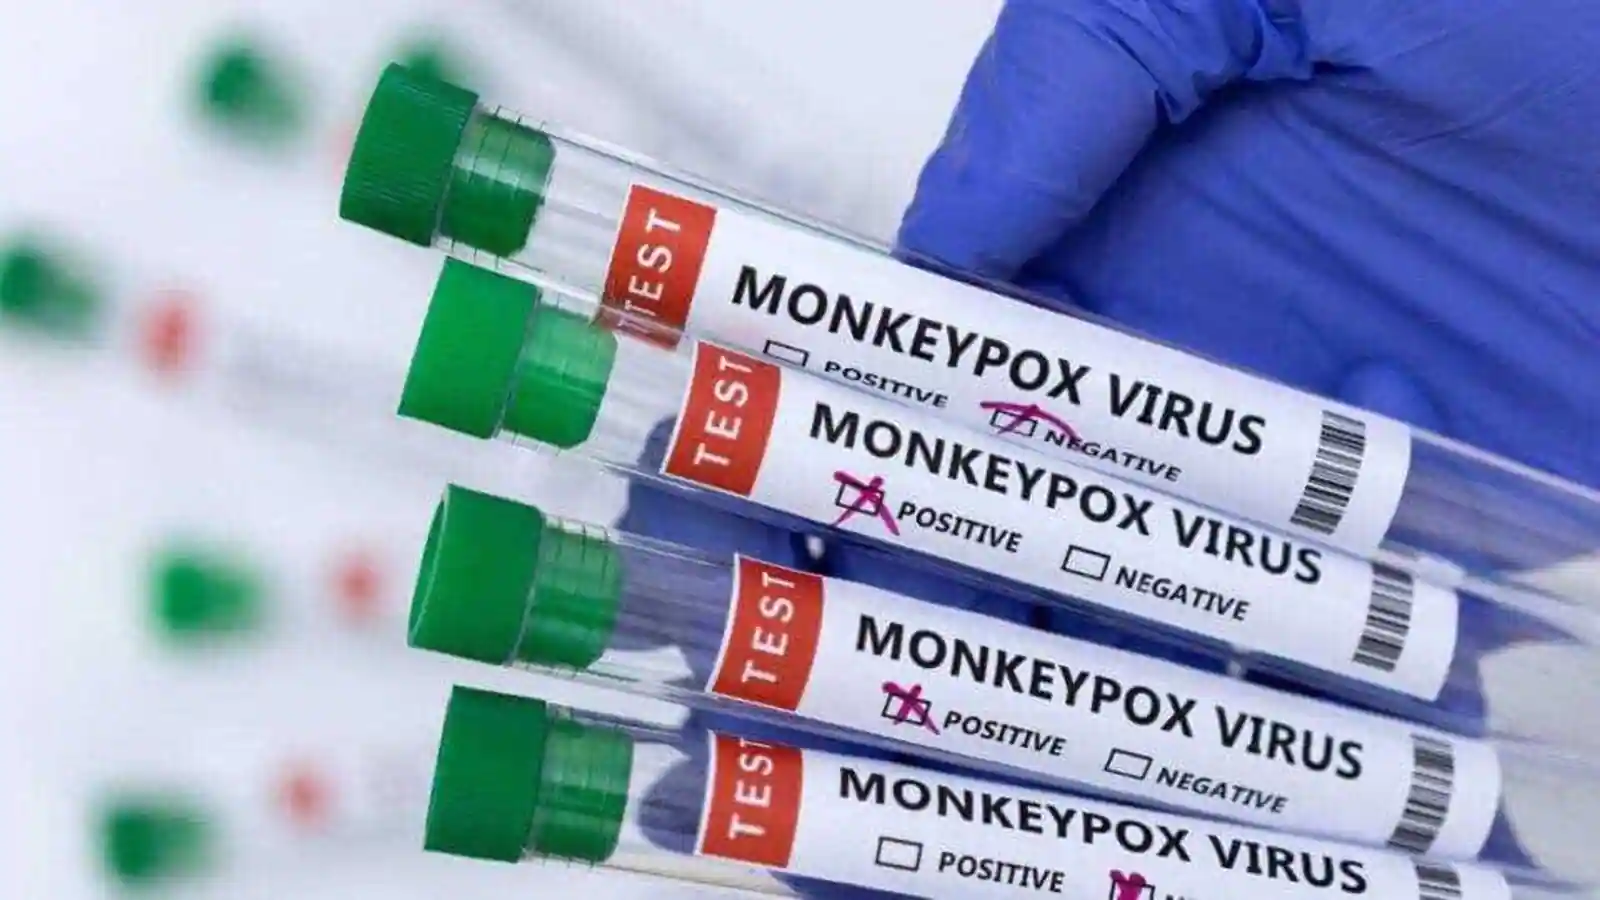 bforblogs Monkeypox in India: Delhi-based man found positive, Total case counts 04 Now